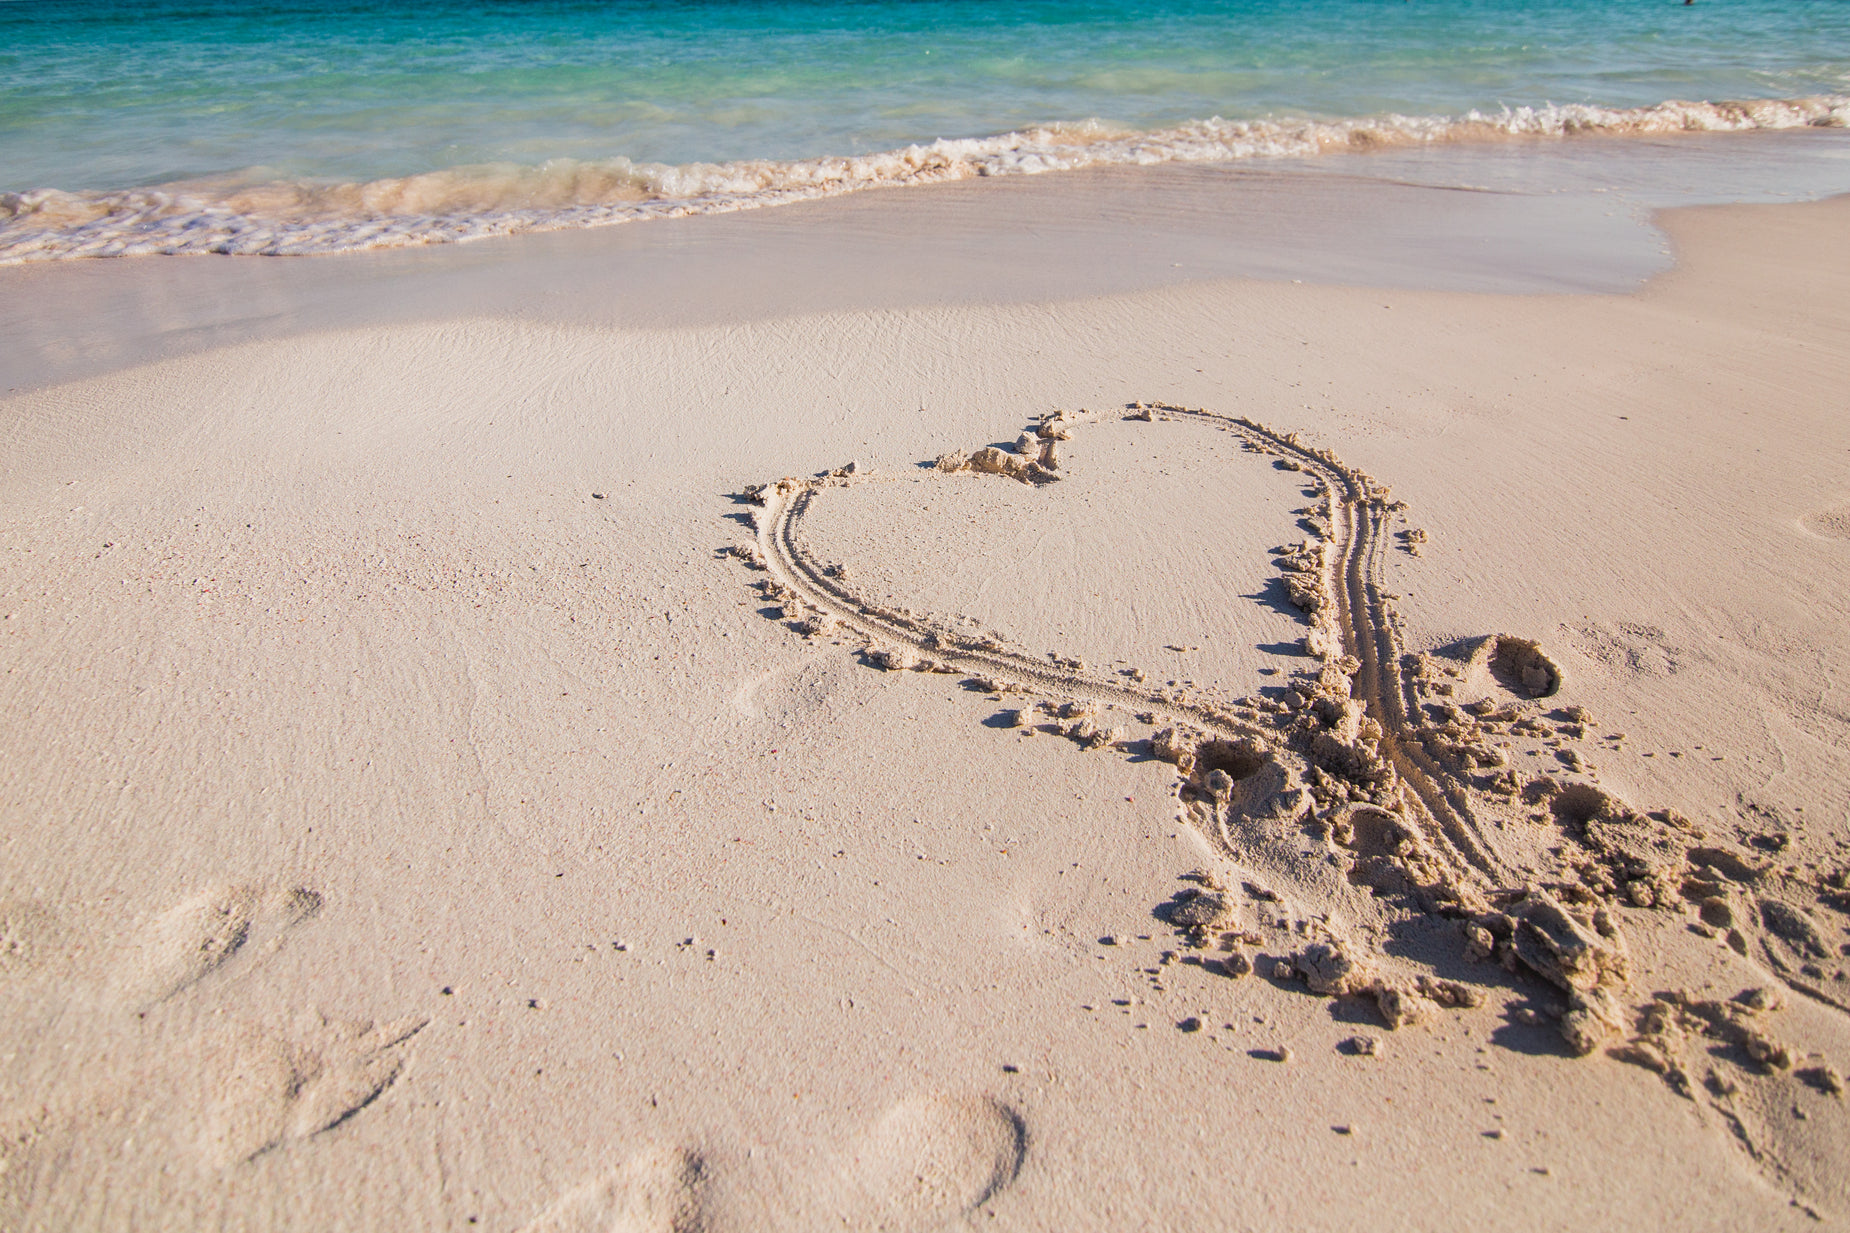 the heart is drawn on the beach by hand